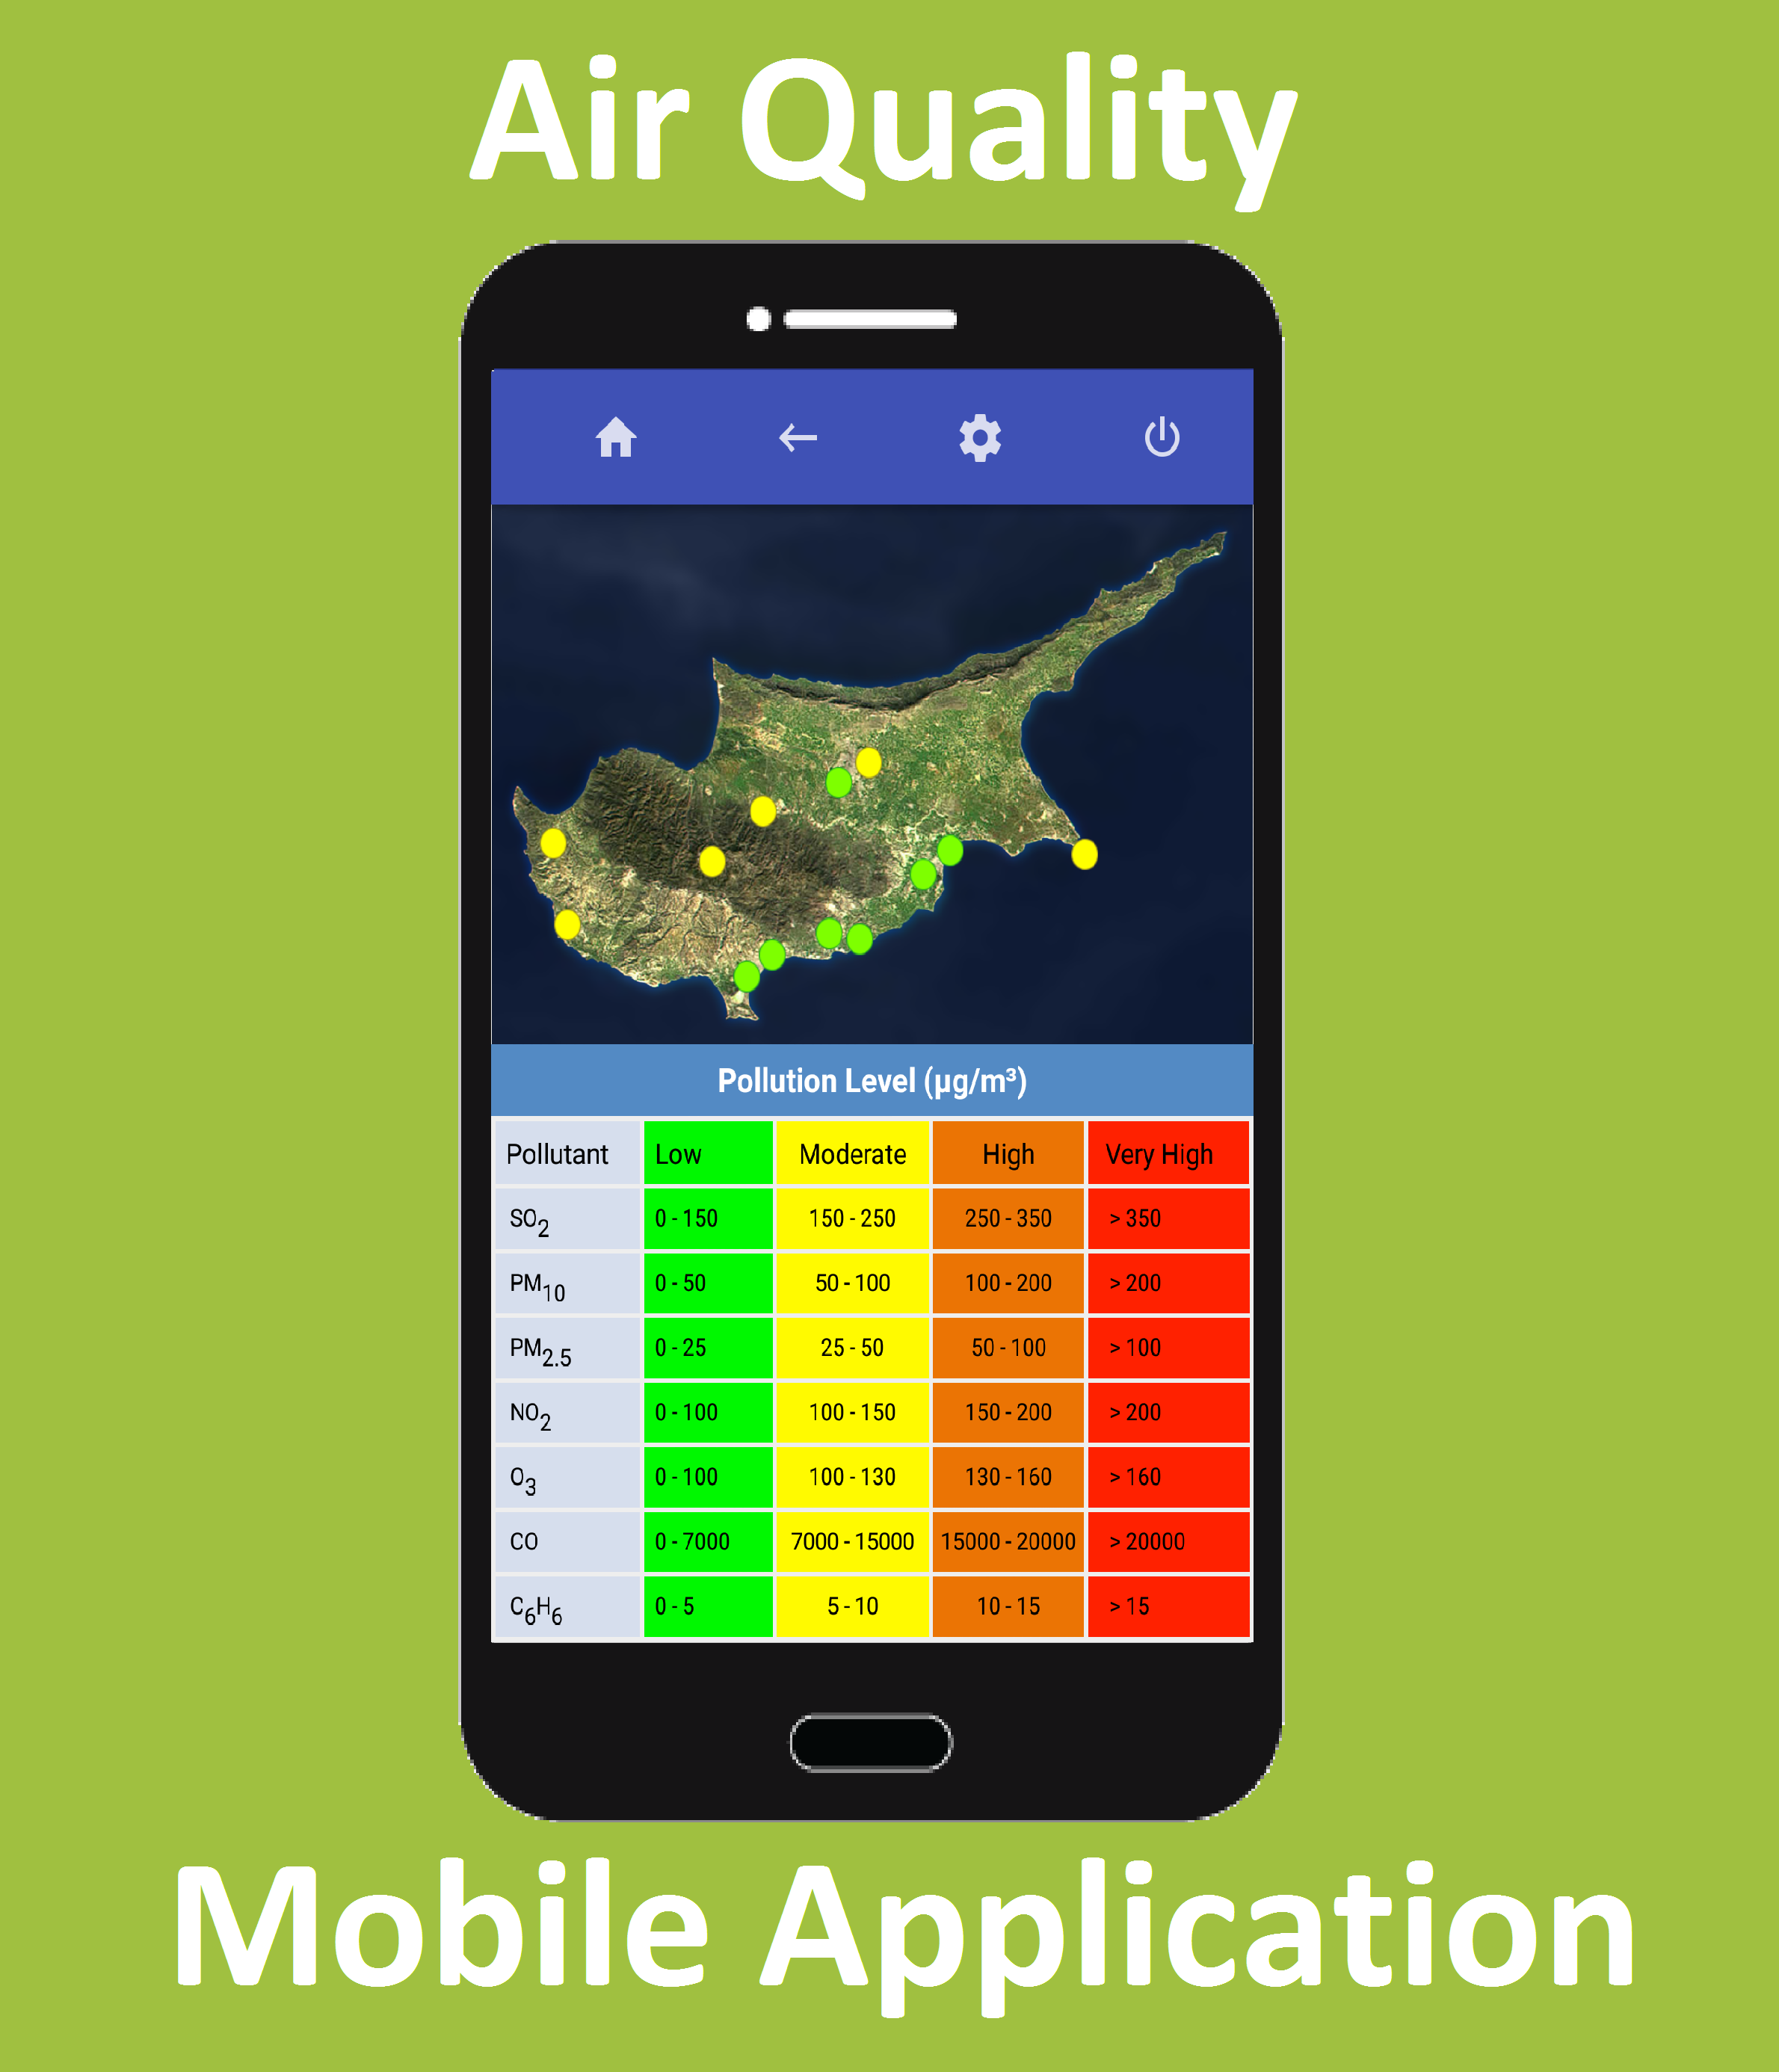 Air Quality - Mobile Application